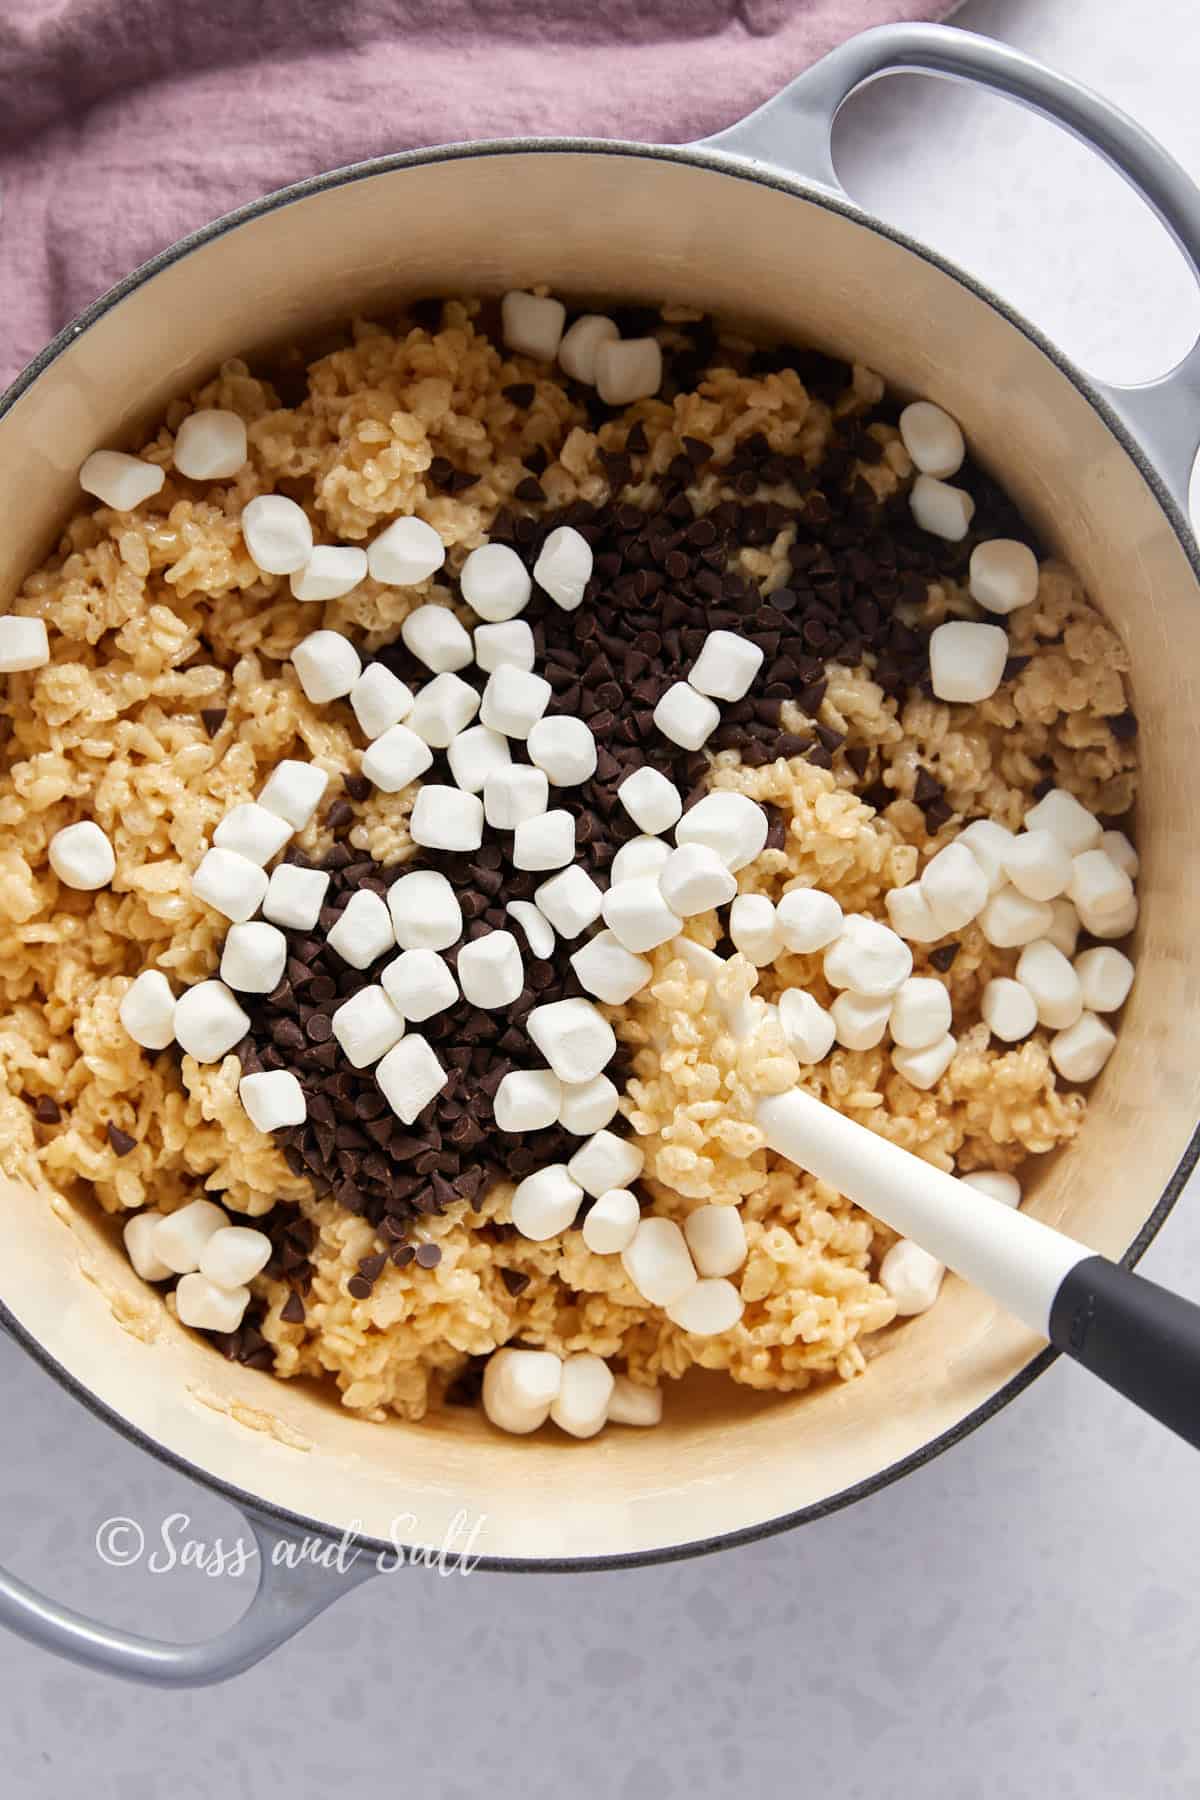 Overhead view of mini chocolate chips and mini marshmallows on top of rice krispies and melted marshmallows in dutch oven.